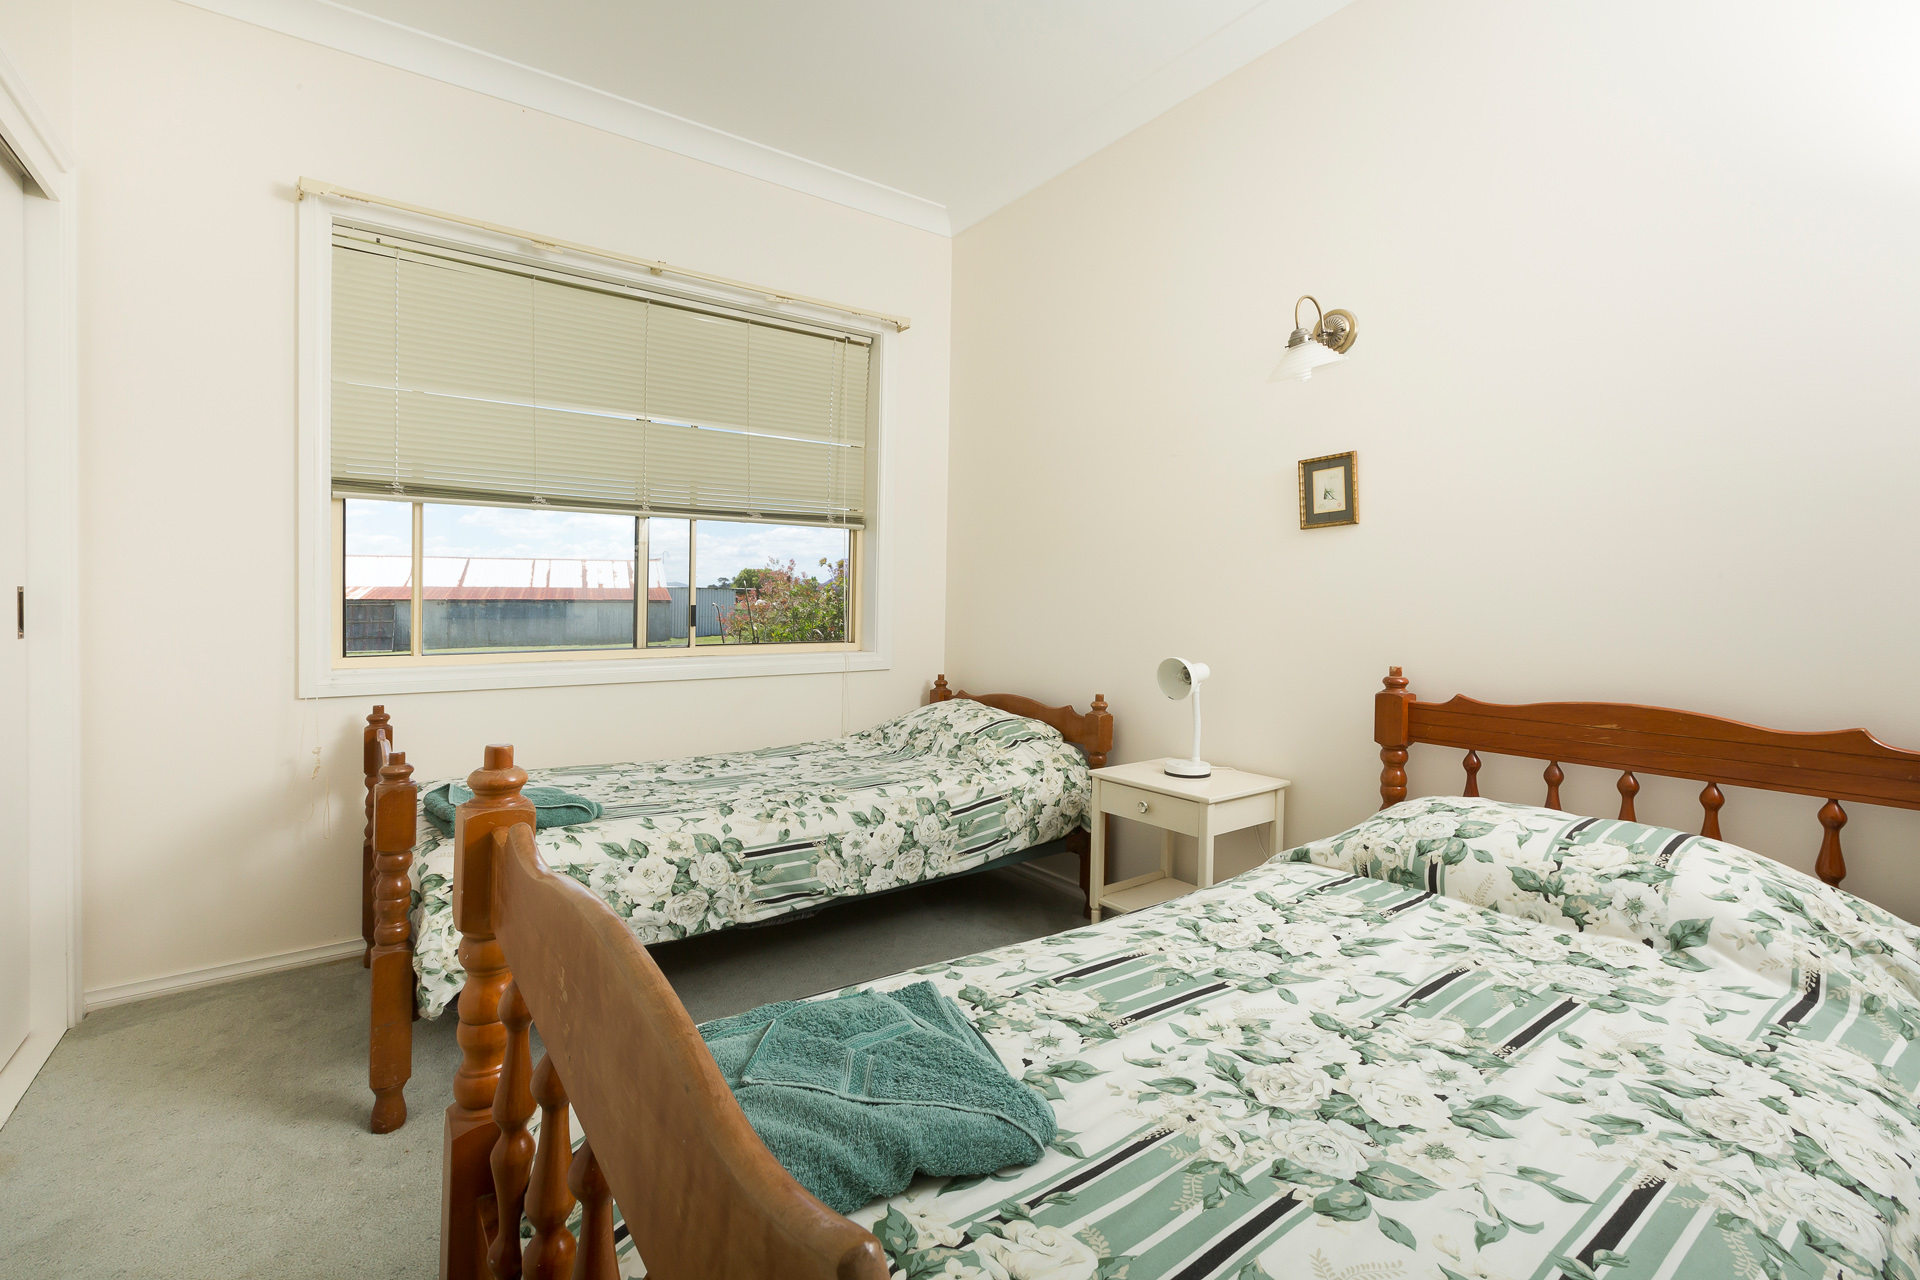 Cranford Waterfront Cottage - Coogee Beach Accommodation 7